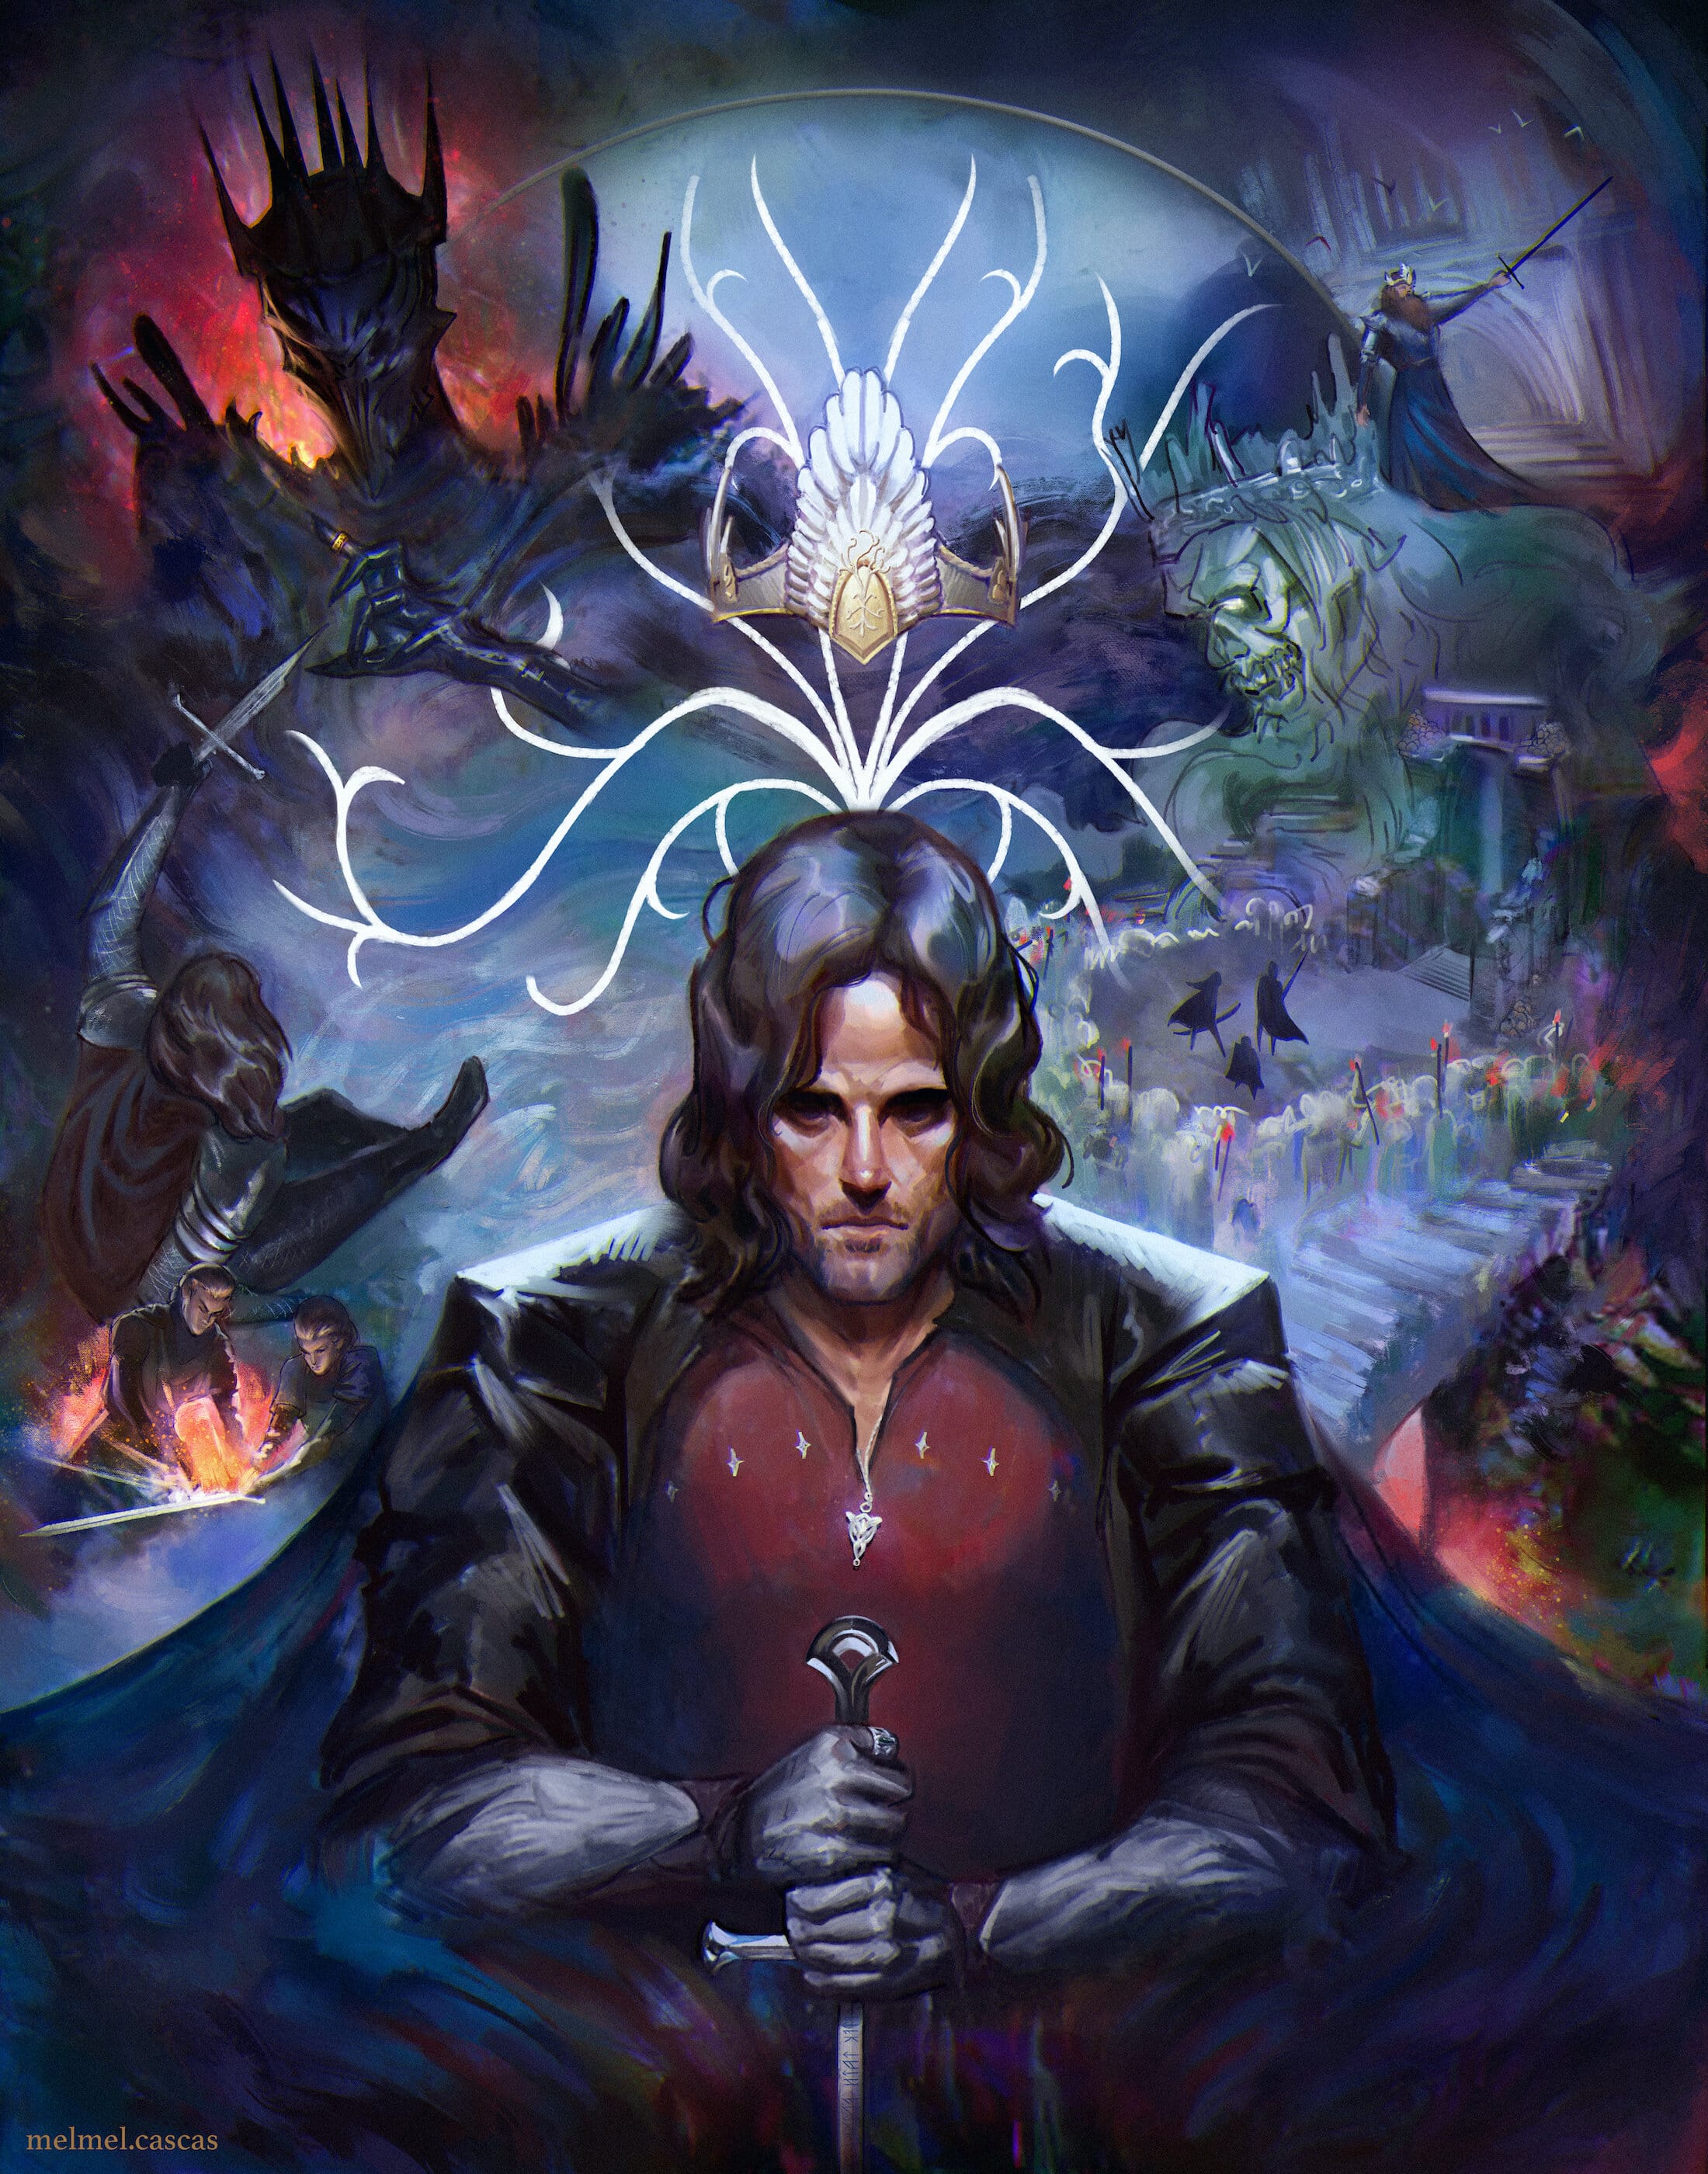 illustration of Aragorn from Lord of the Rings